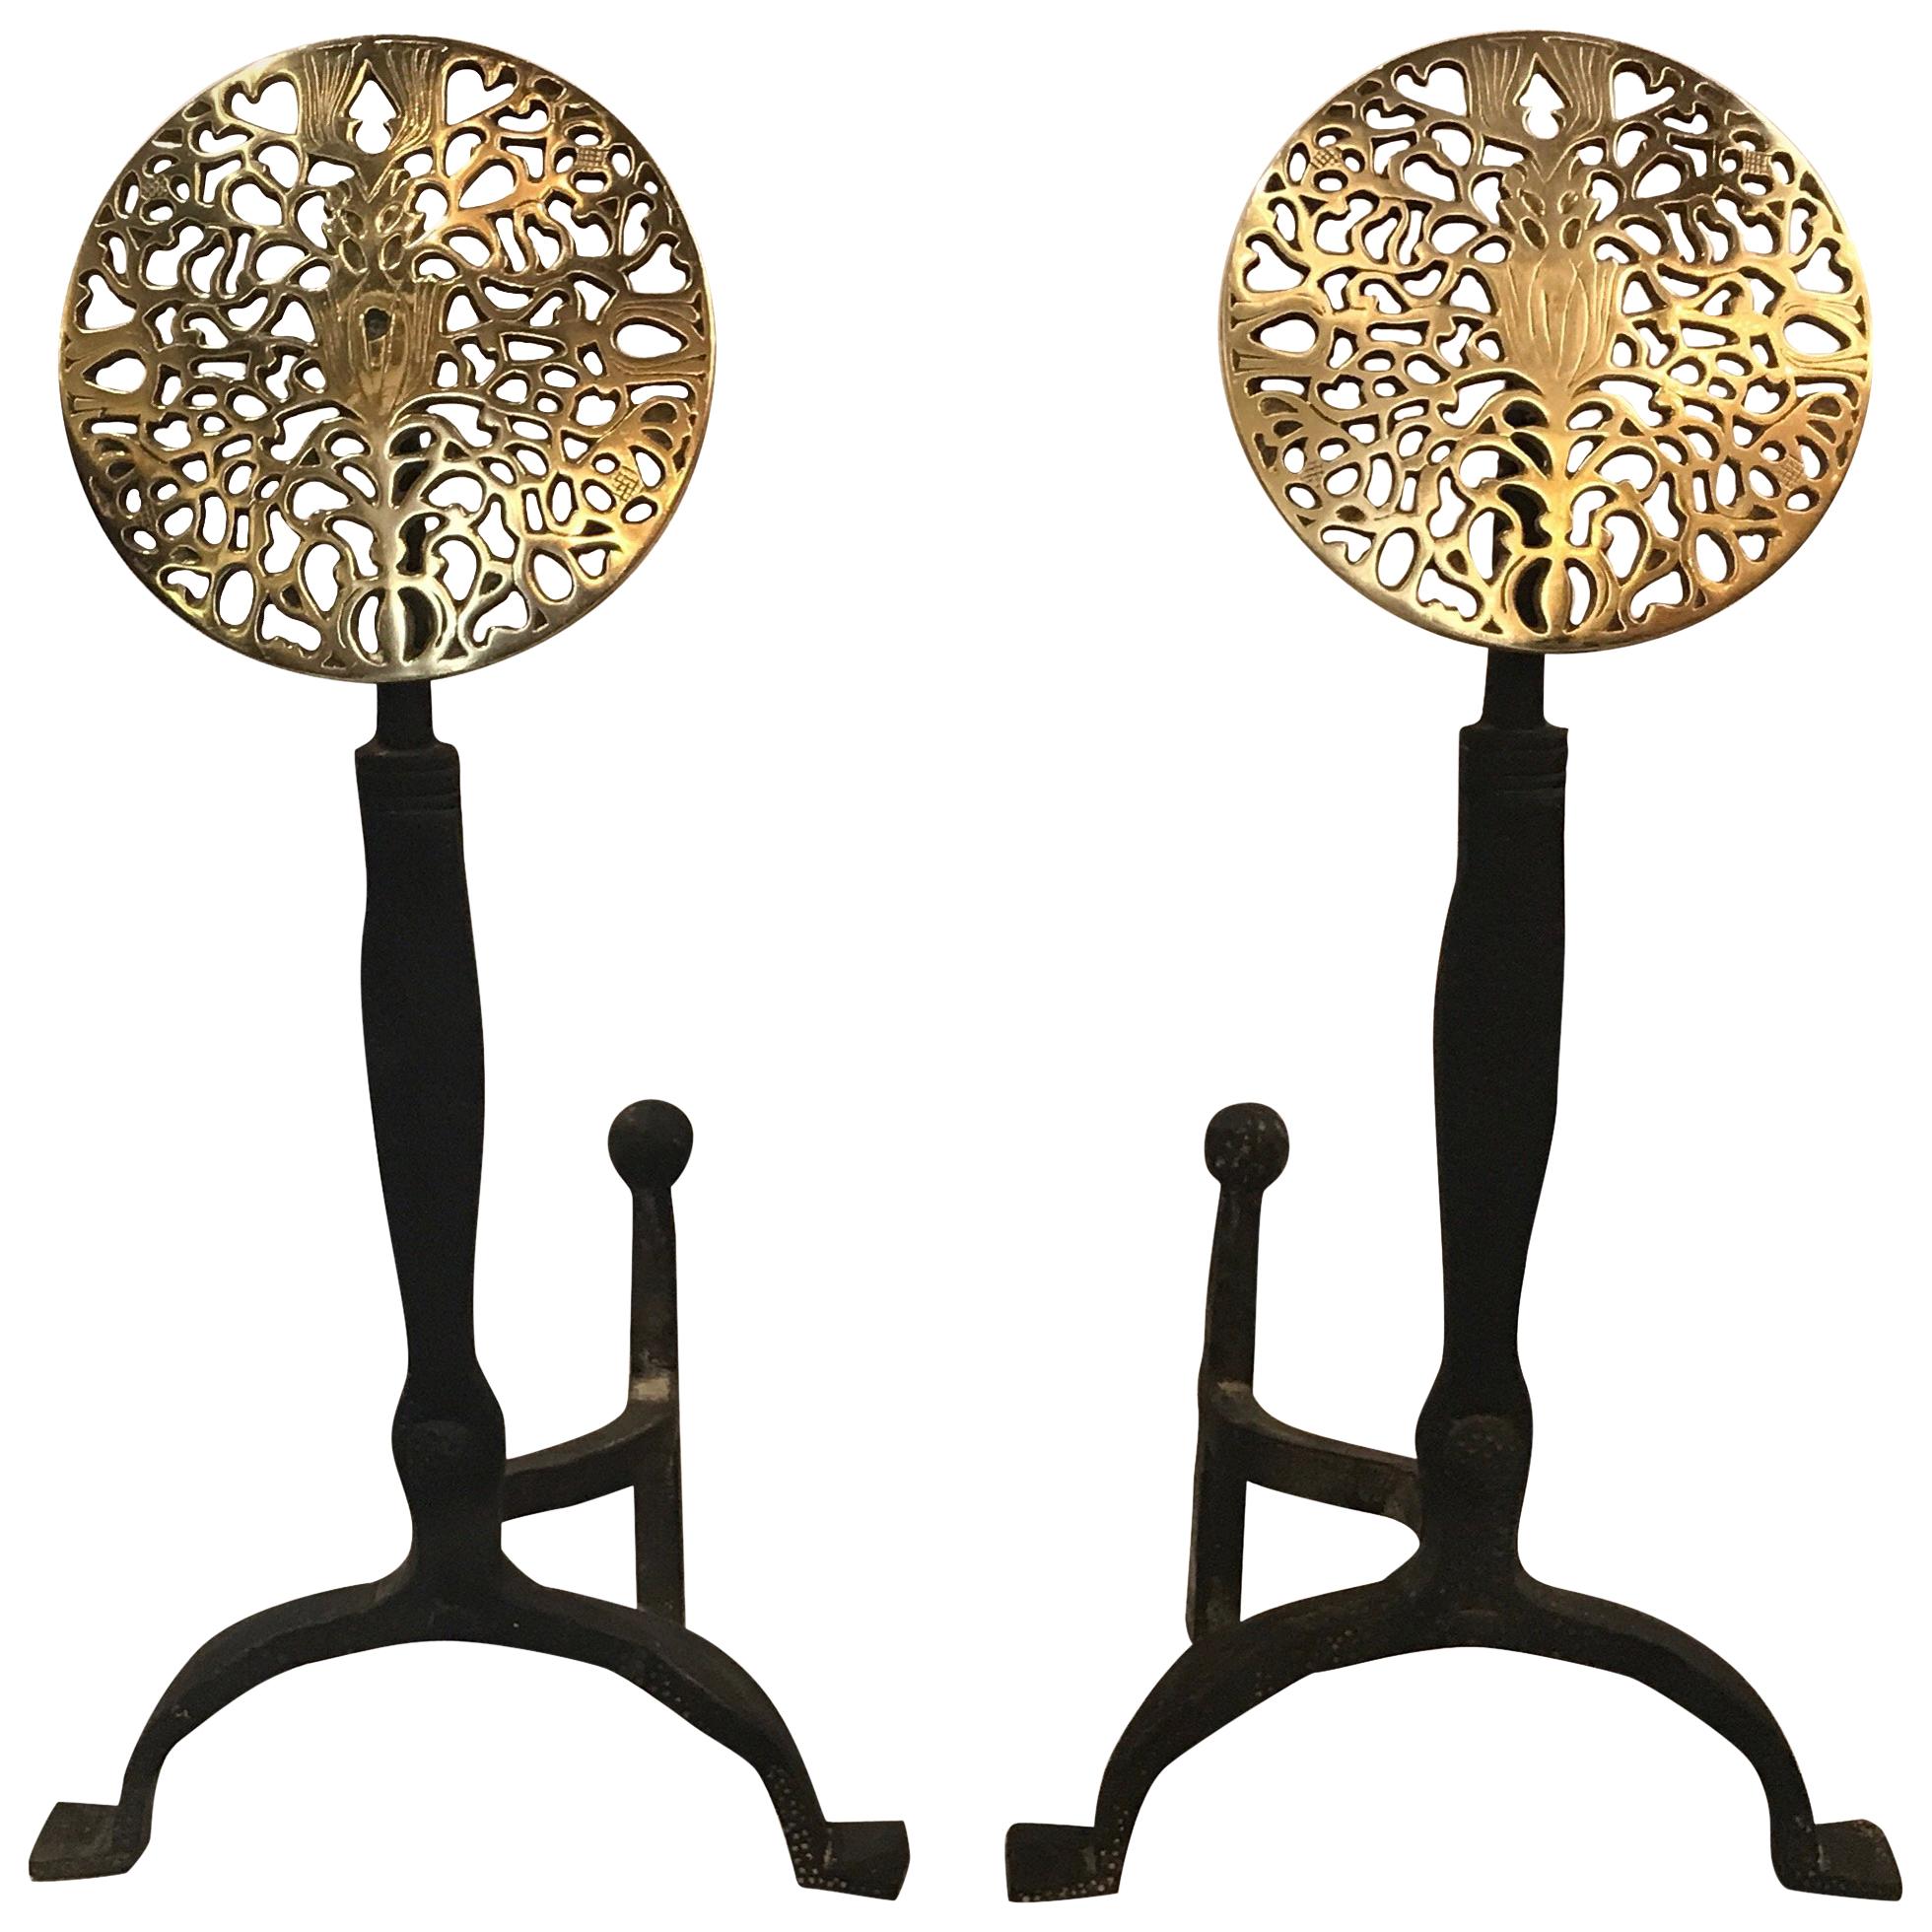 Pair of Hand-Forged Iron and Brass Andirons